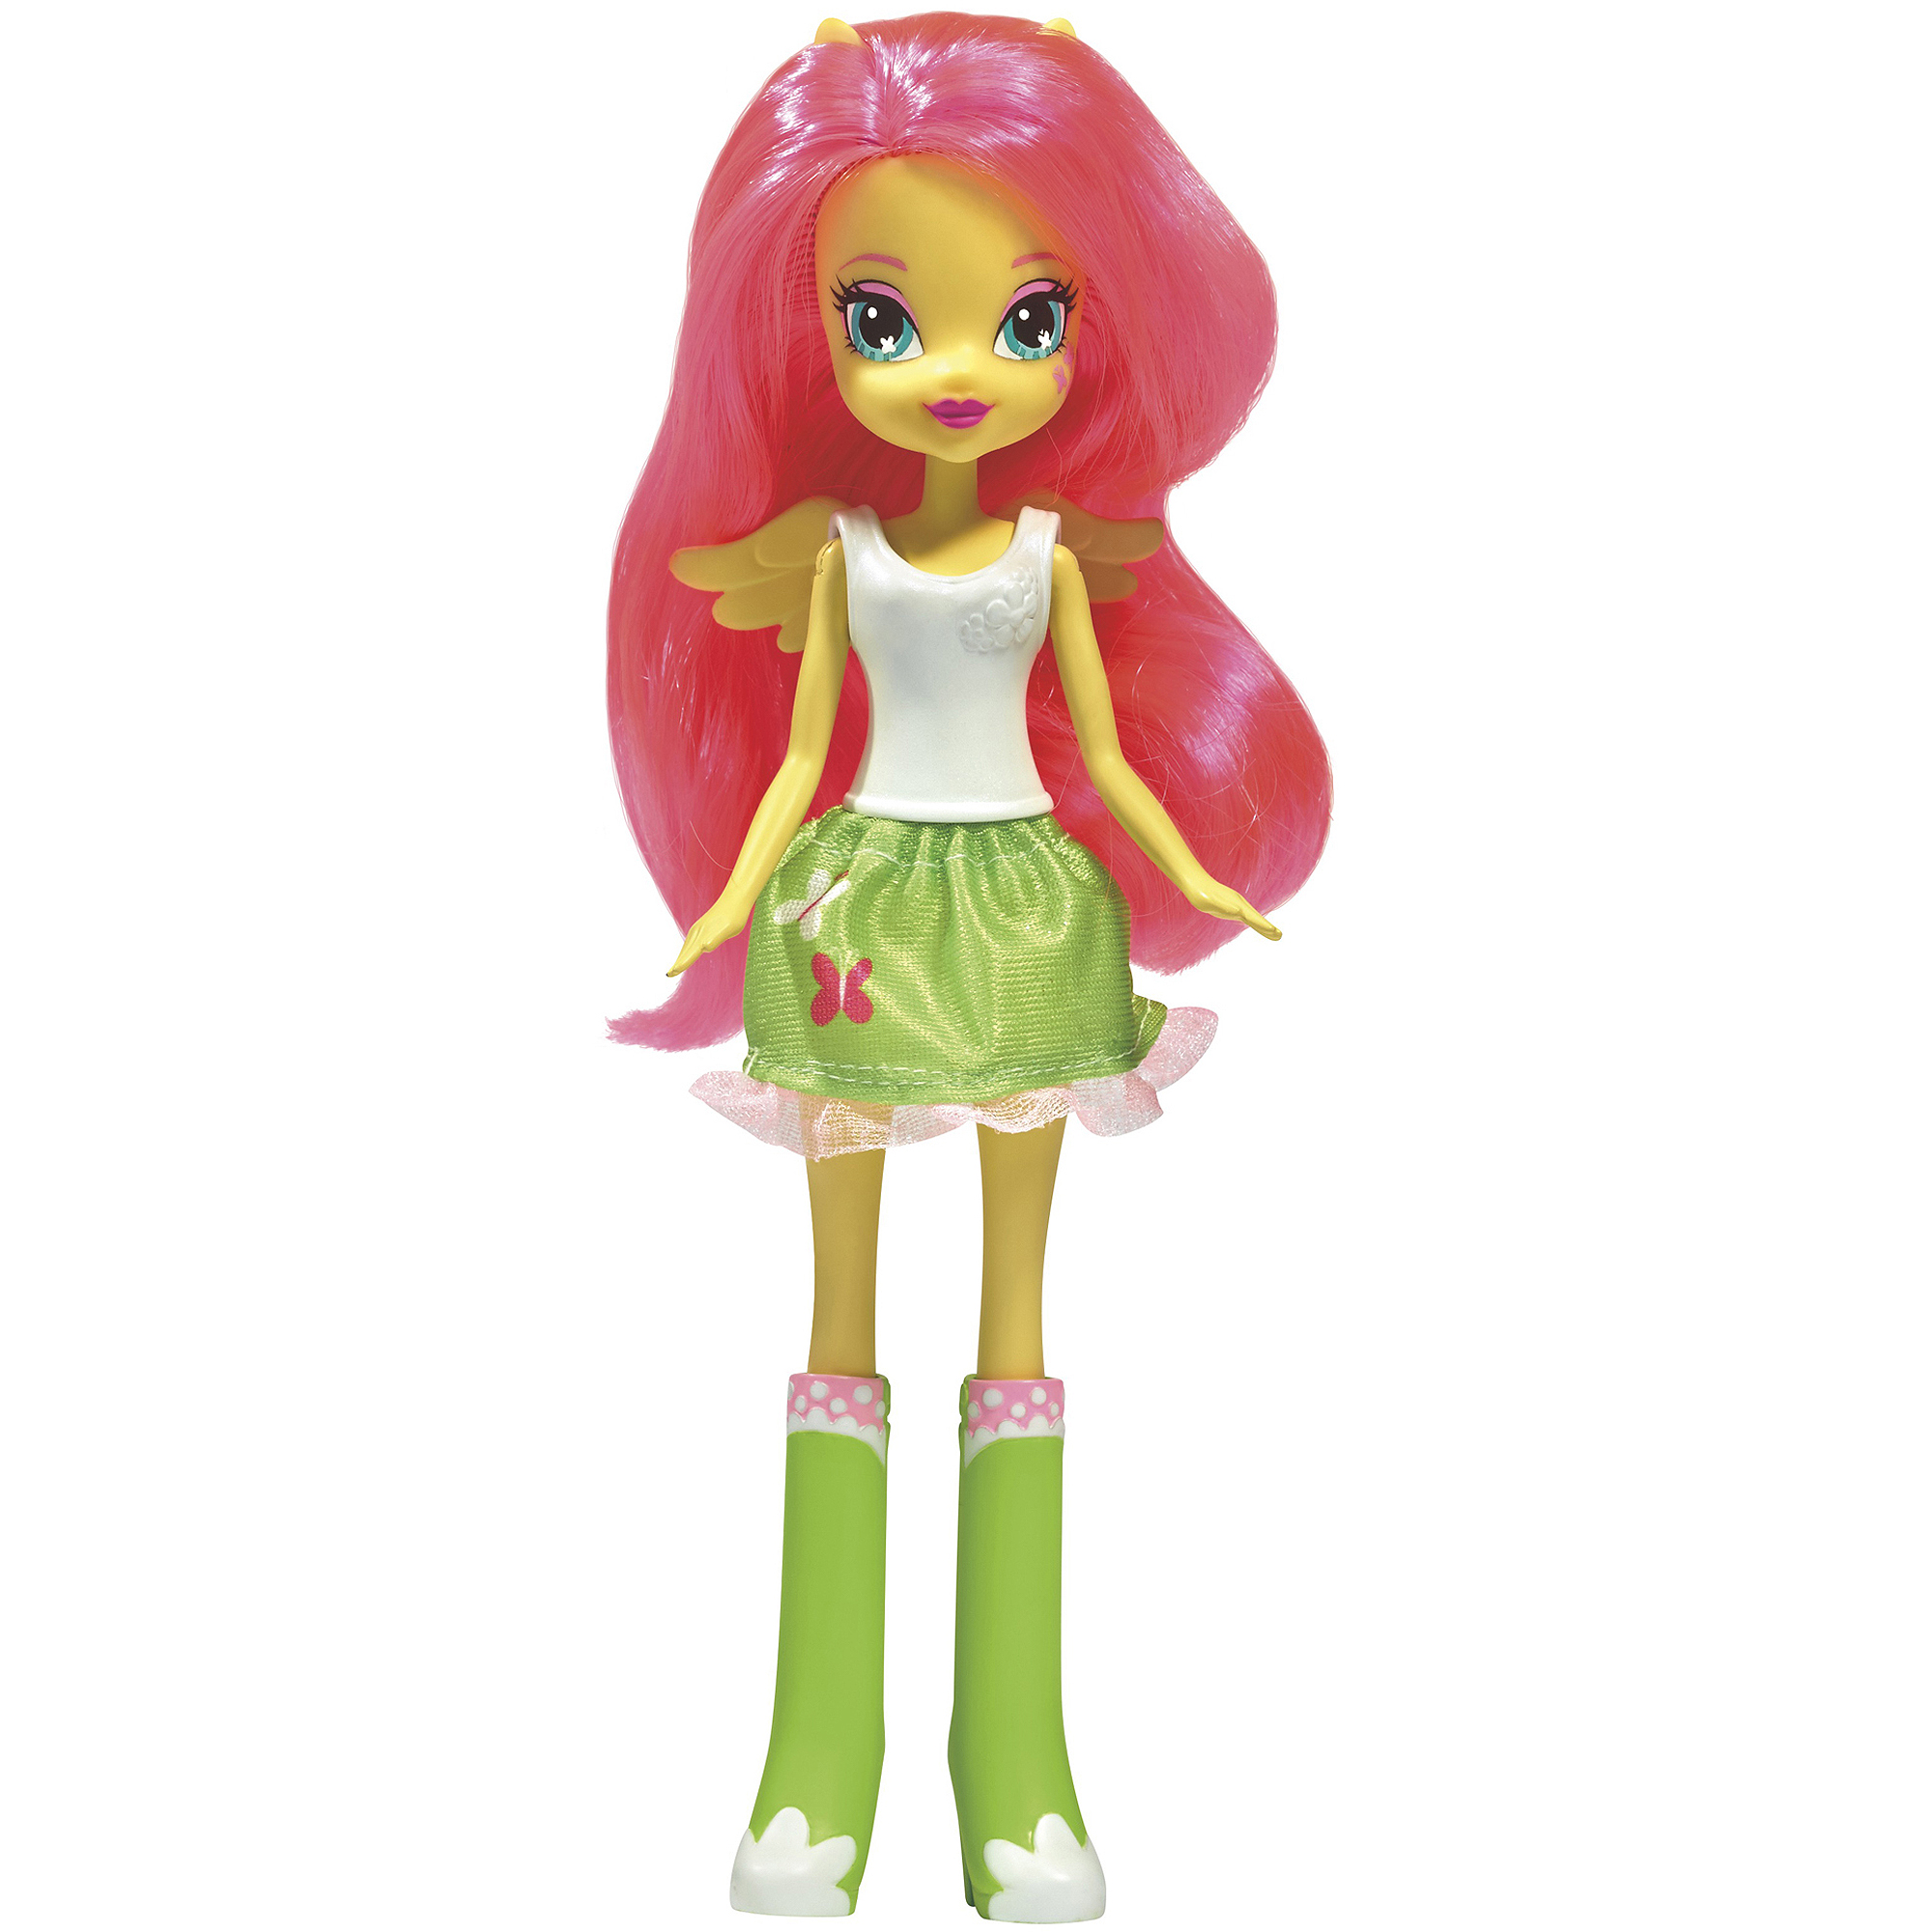 My Little Pony Equestria Girls Collection Fluttershy Doll - image 4 of 6